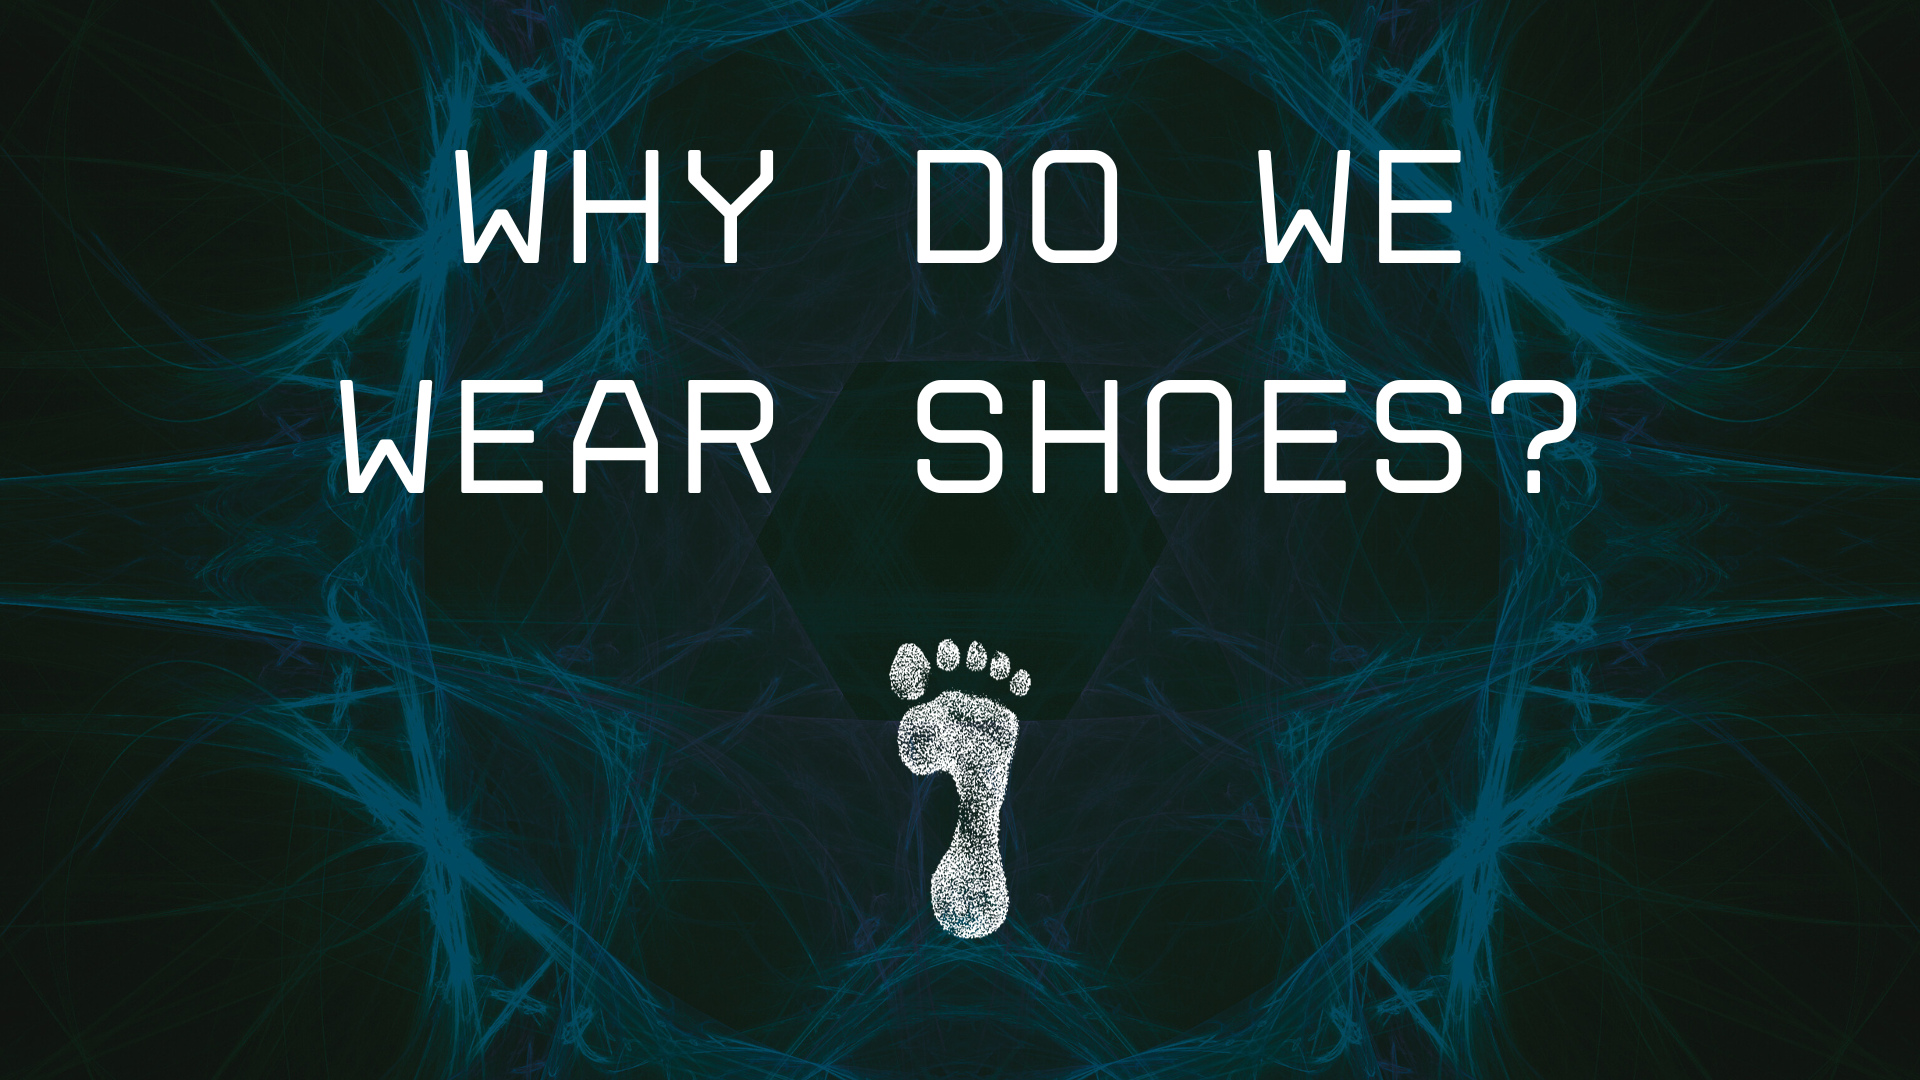 Why do we wear shoes?